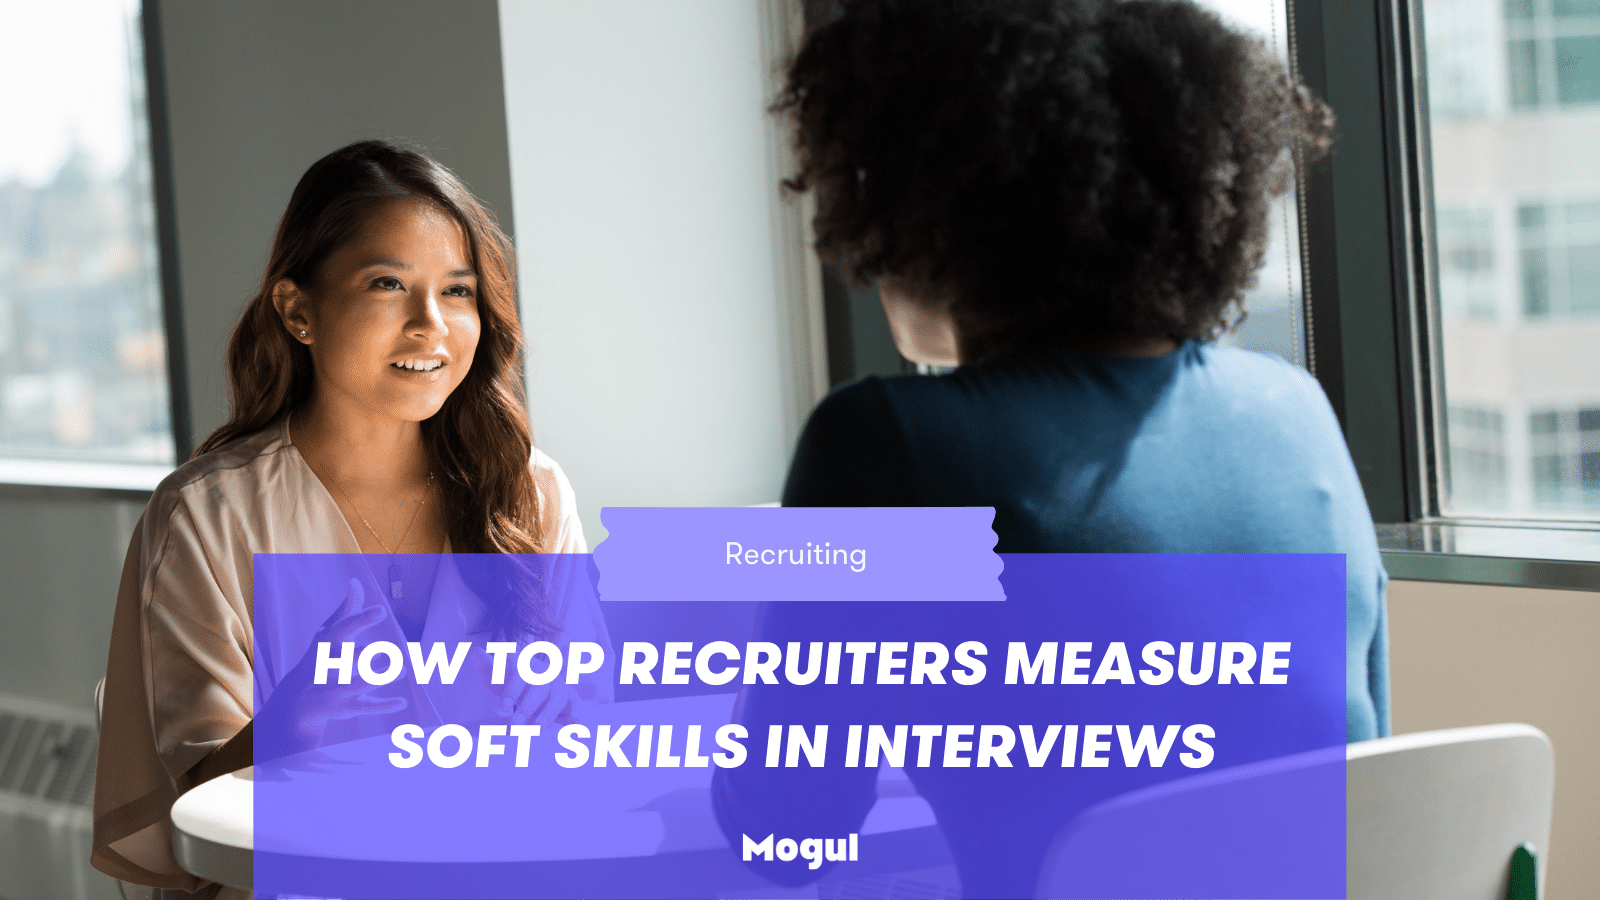 How Top Recruiters Measure Soft Skills in Interviews